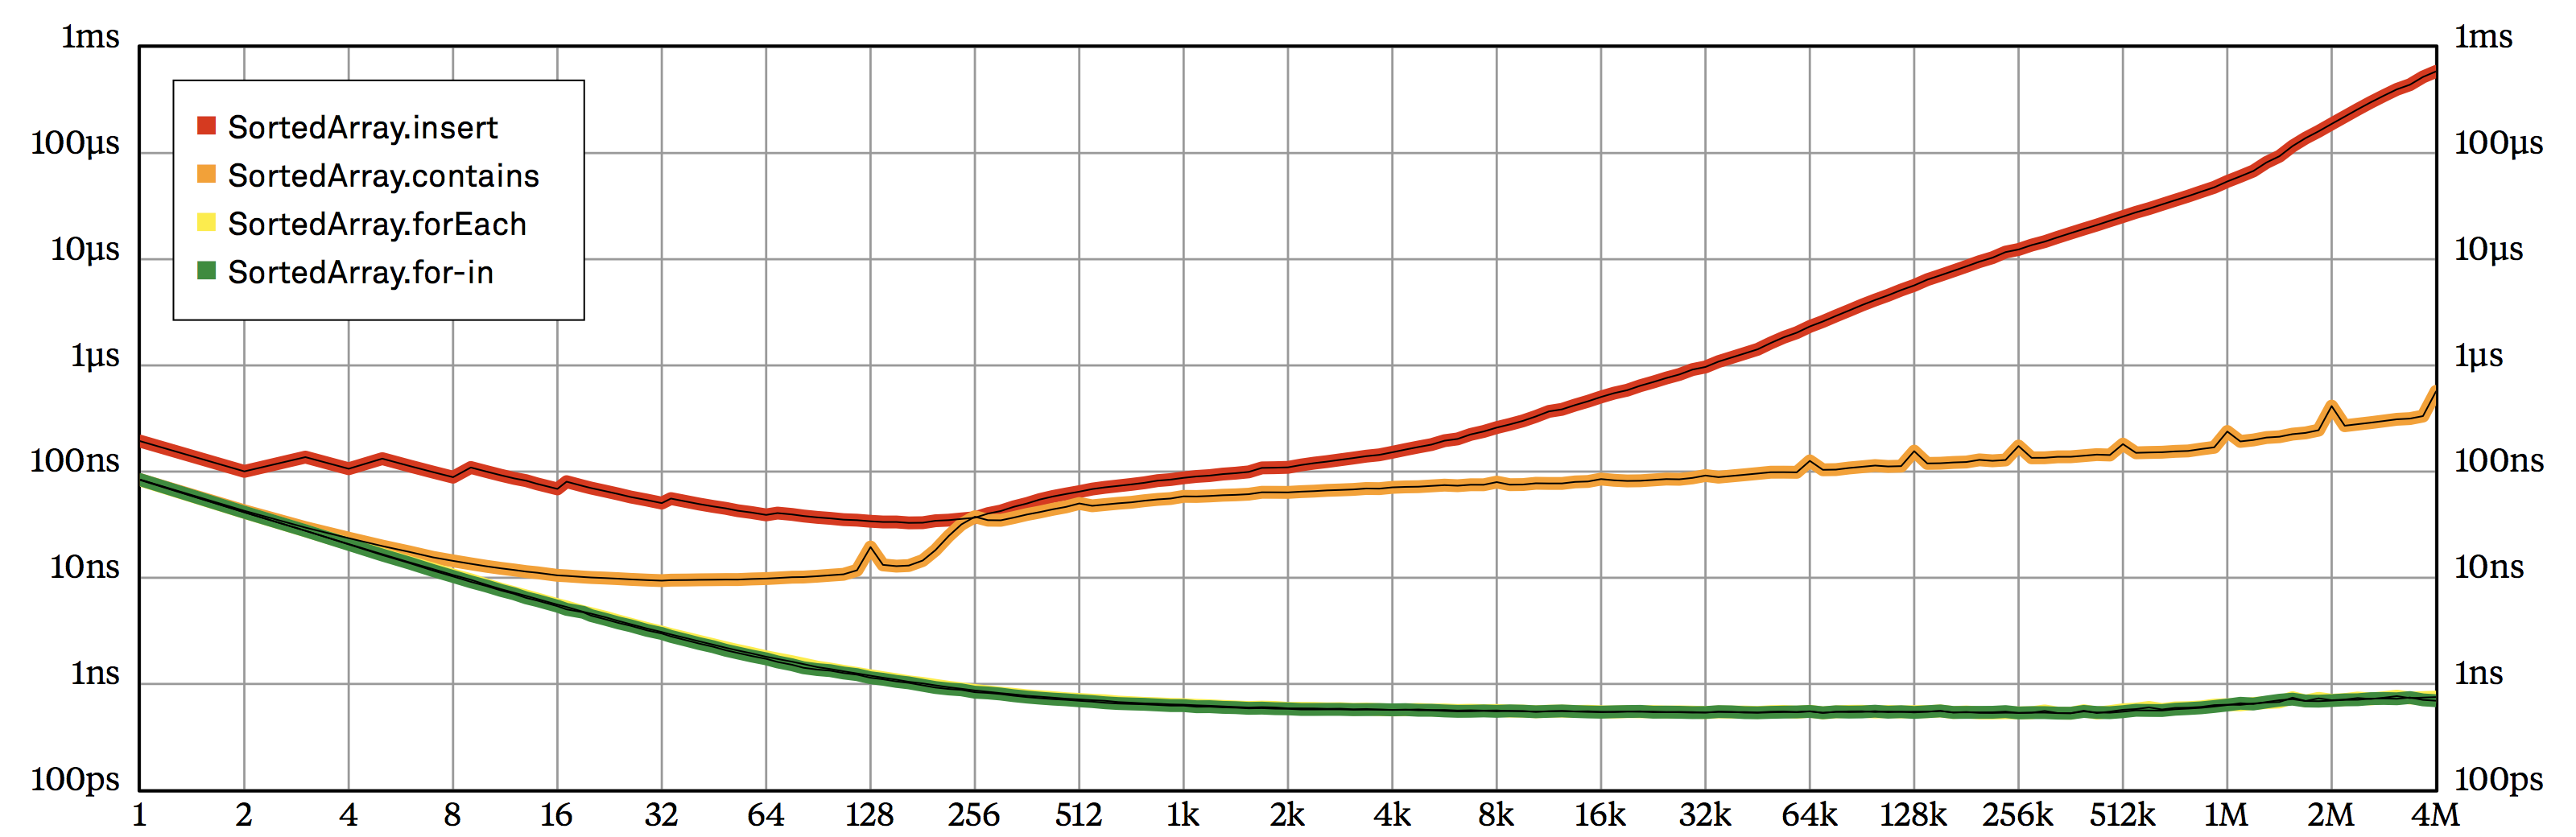 Figure 2.2: Benchmark results for SortedArray operations, plotting input size vs. average execution time for a single operation on a log-log chart.